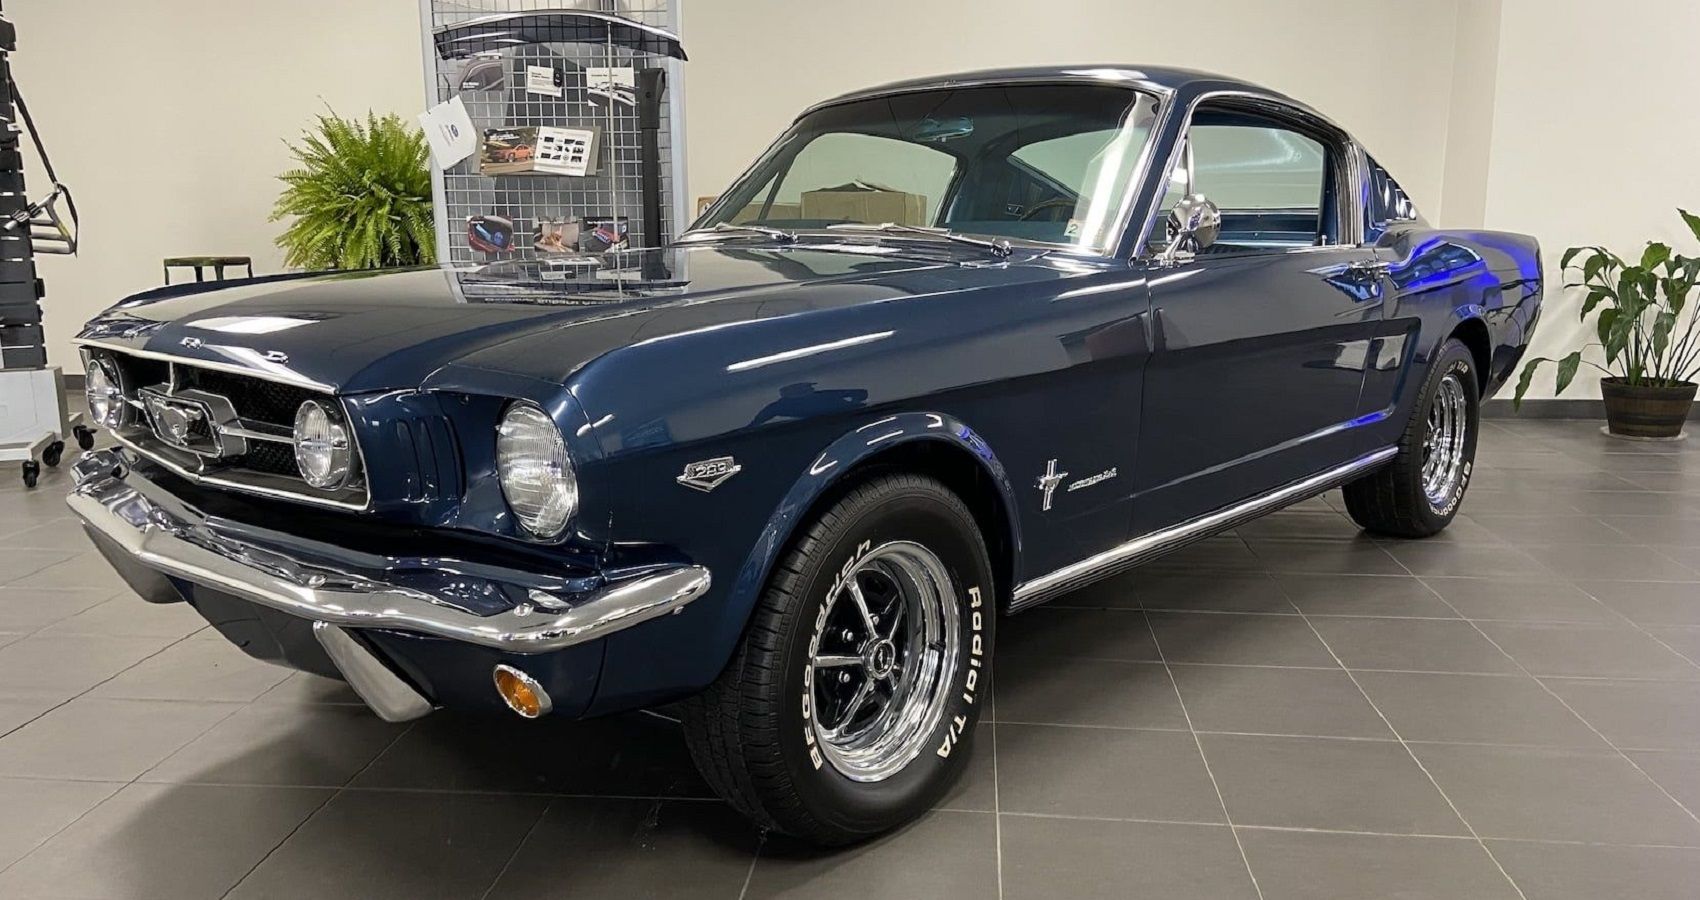 How much is the old Mustang worth?